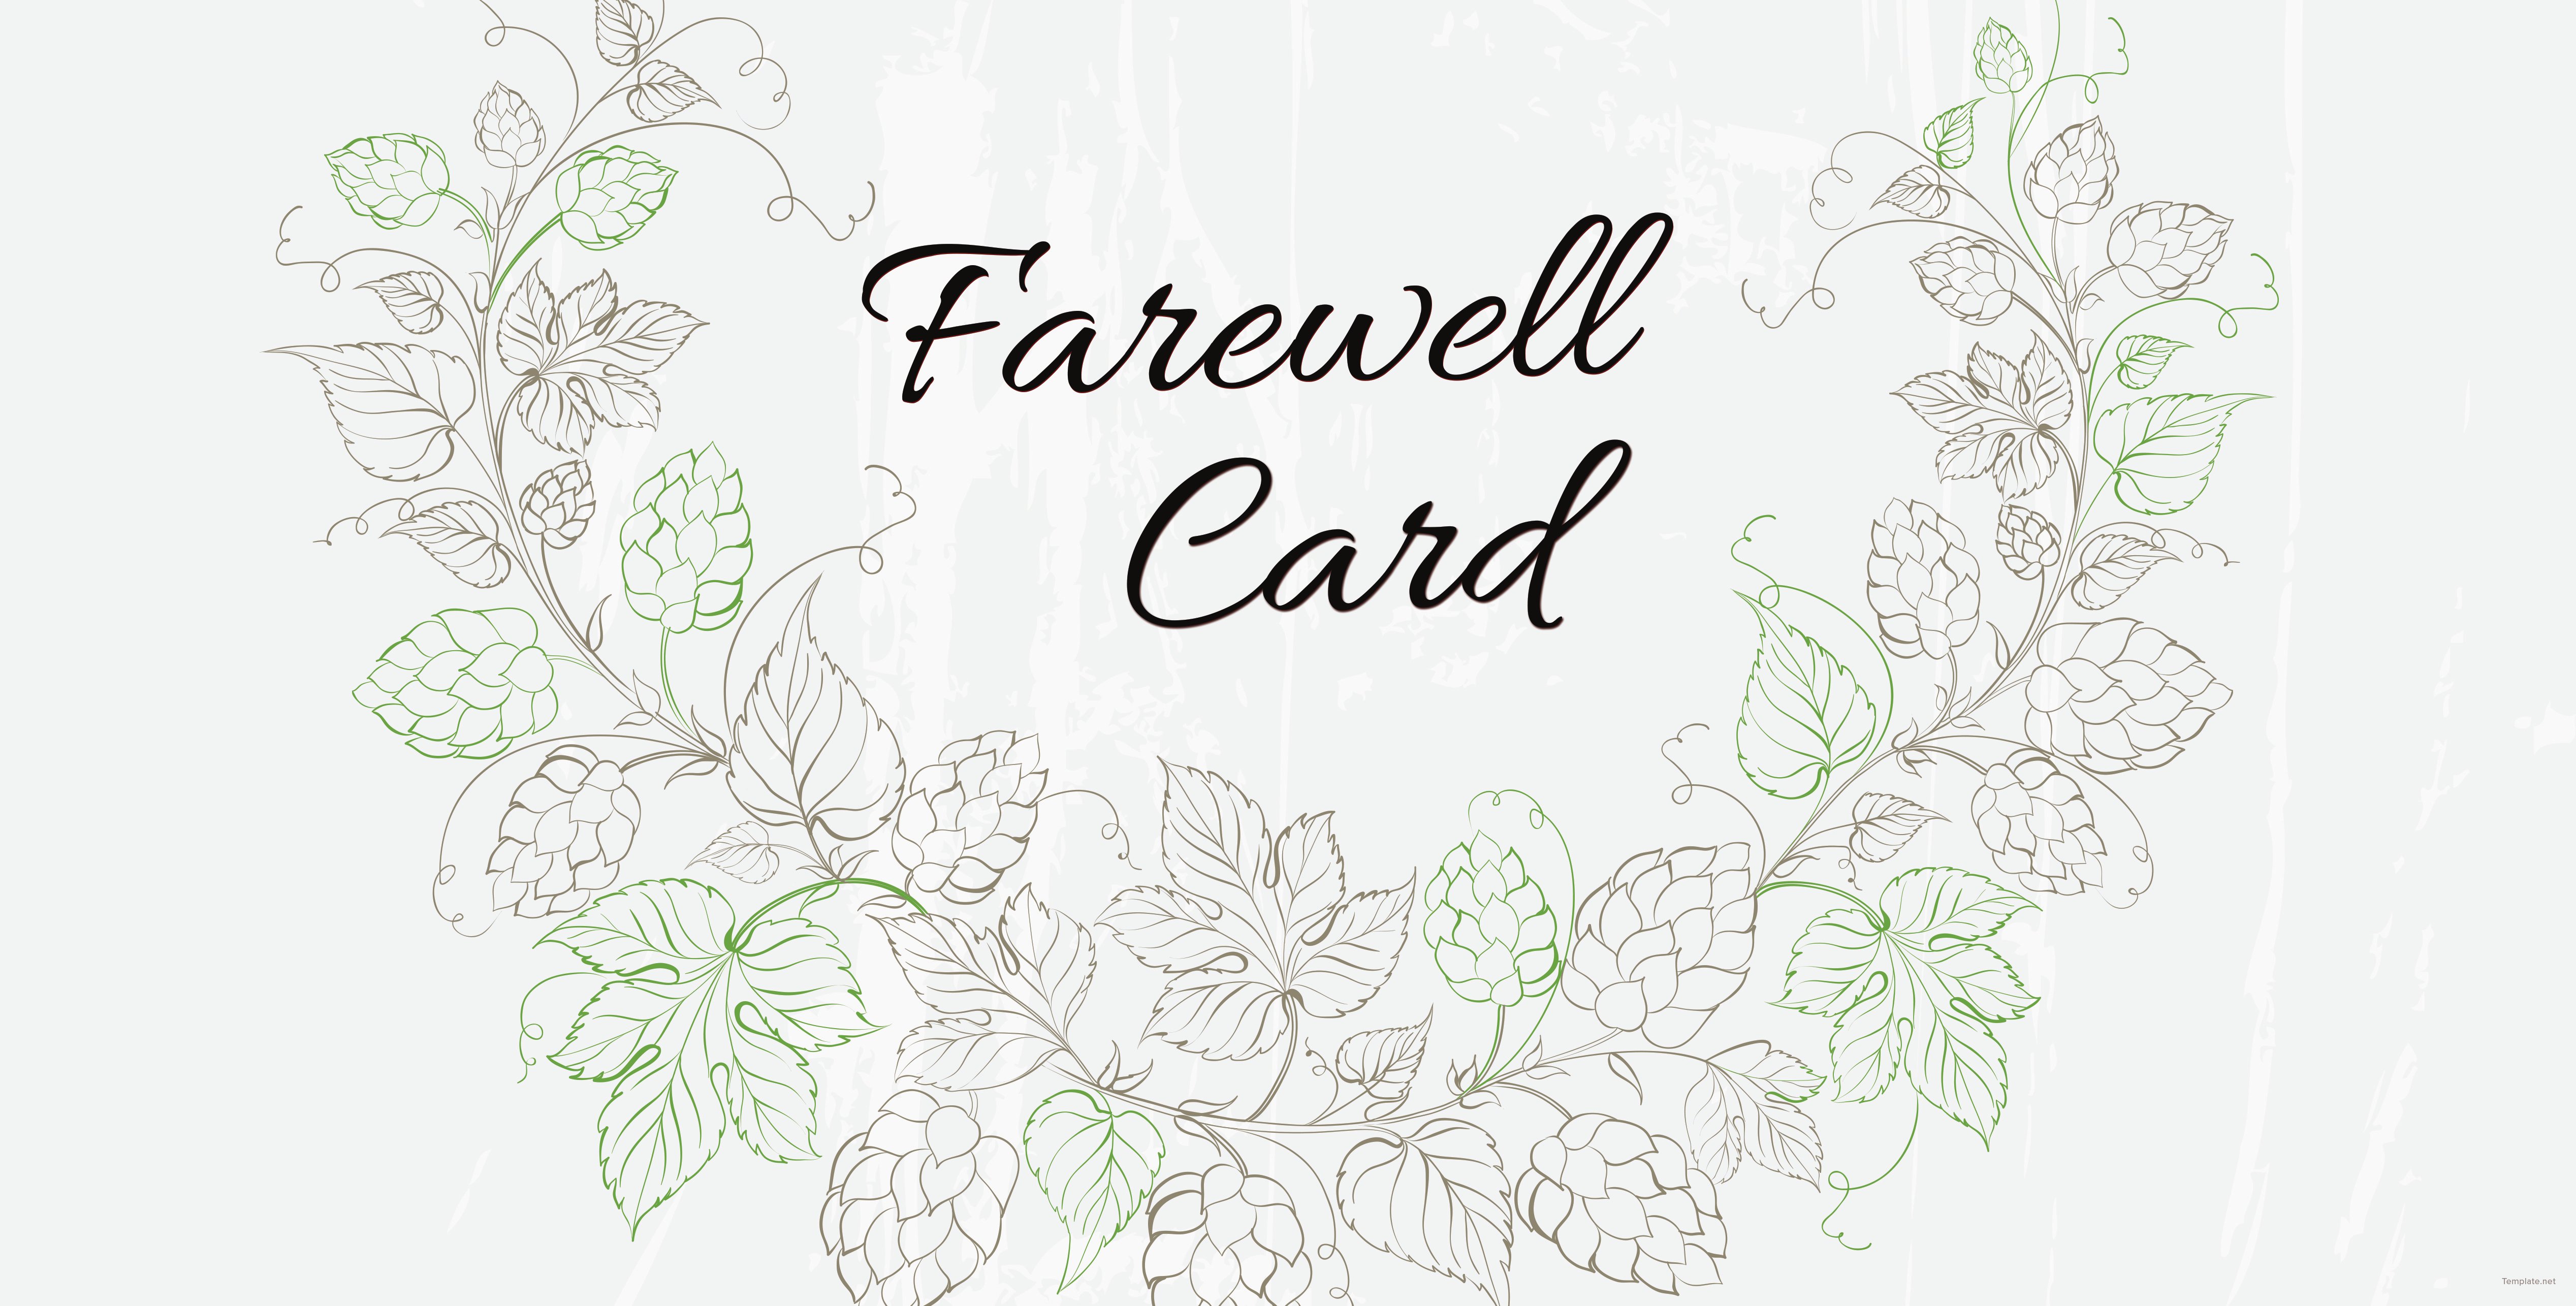 Farewell Card Template Word - Professional Sample Template